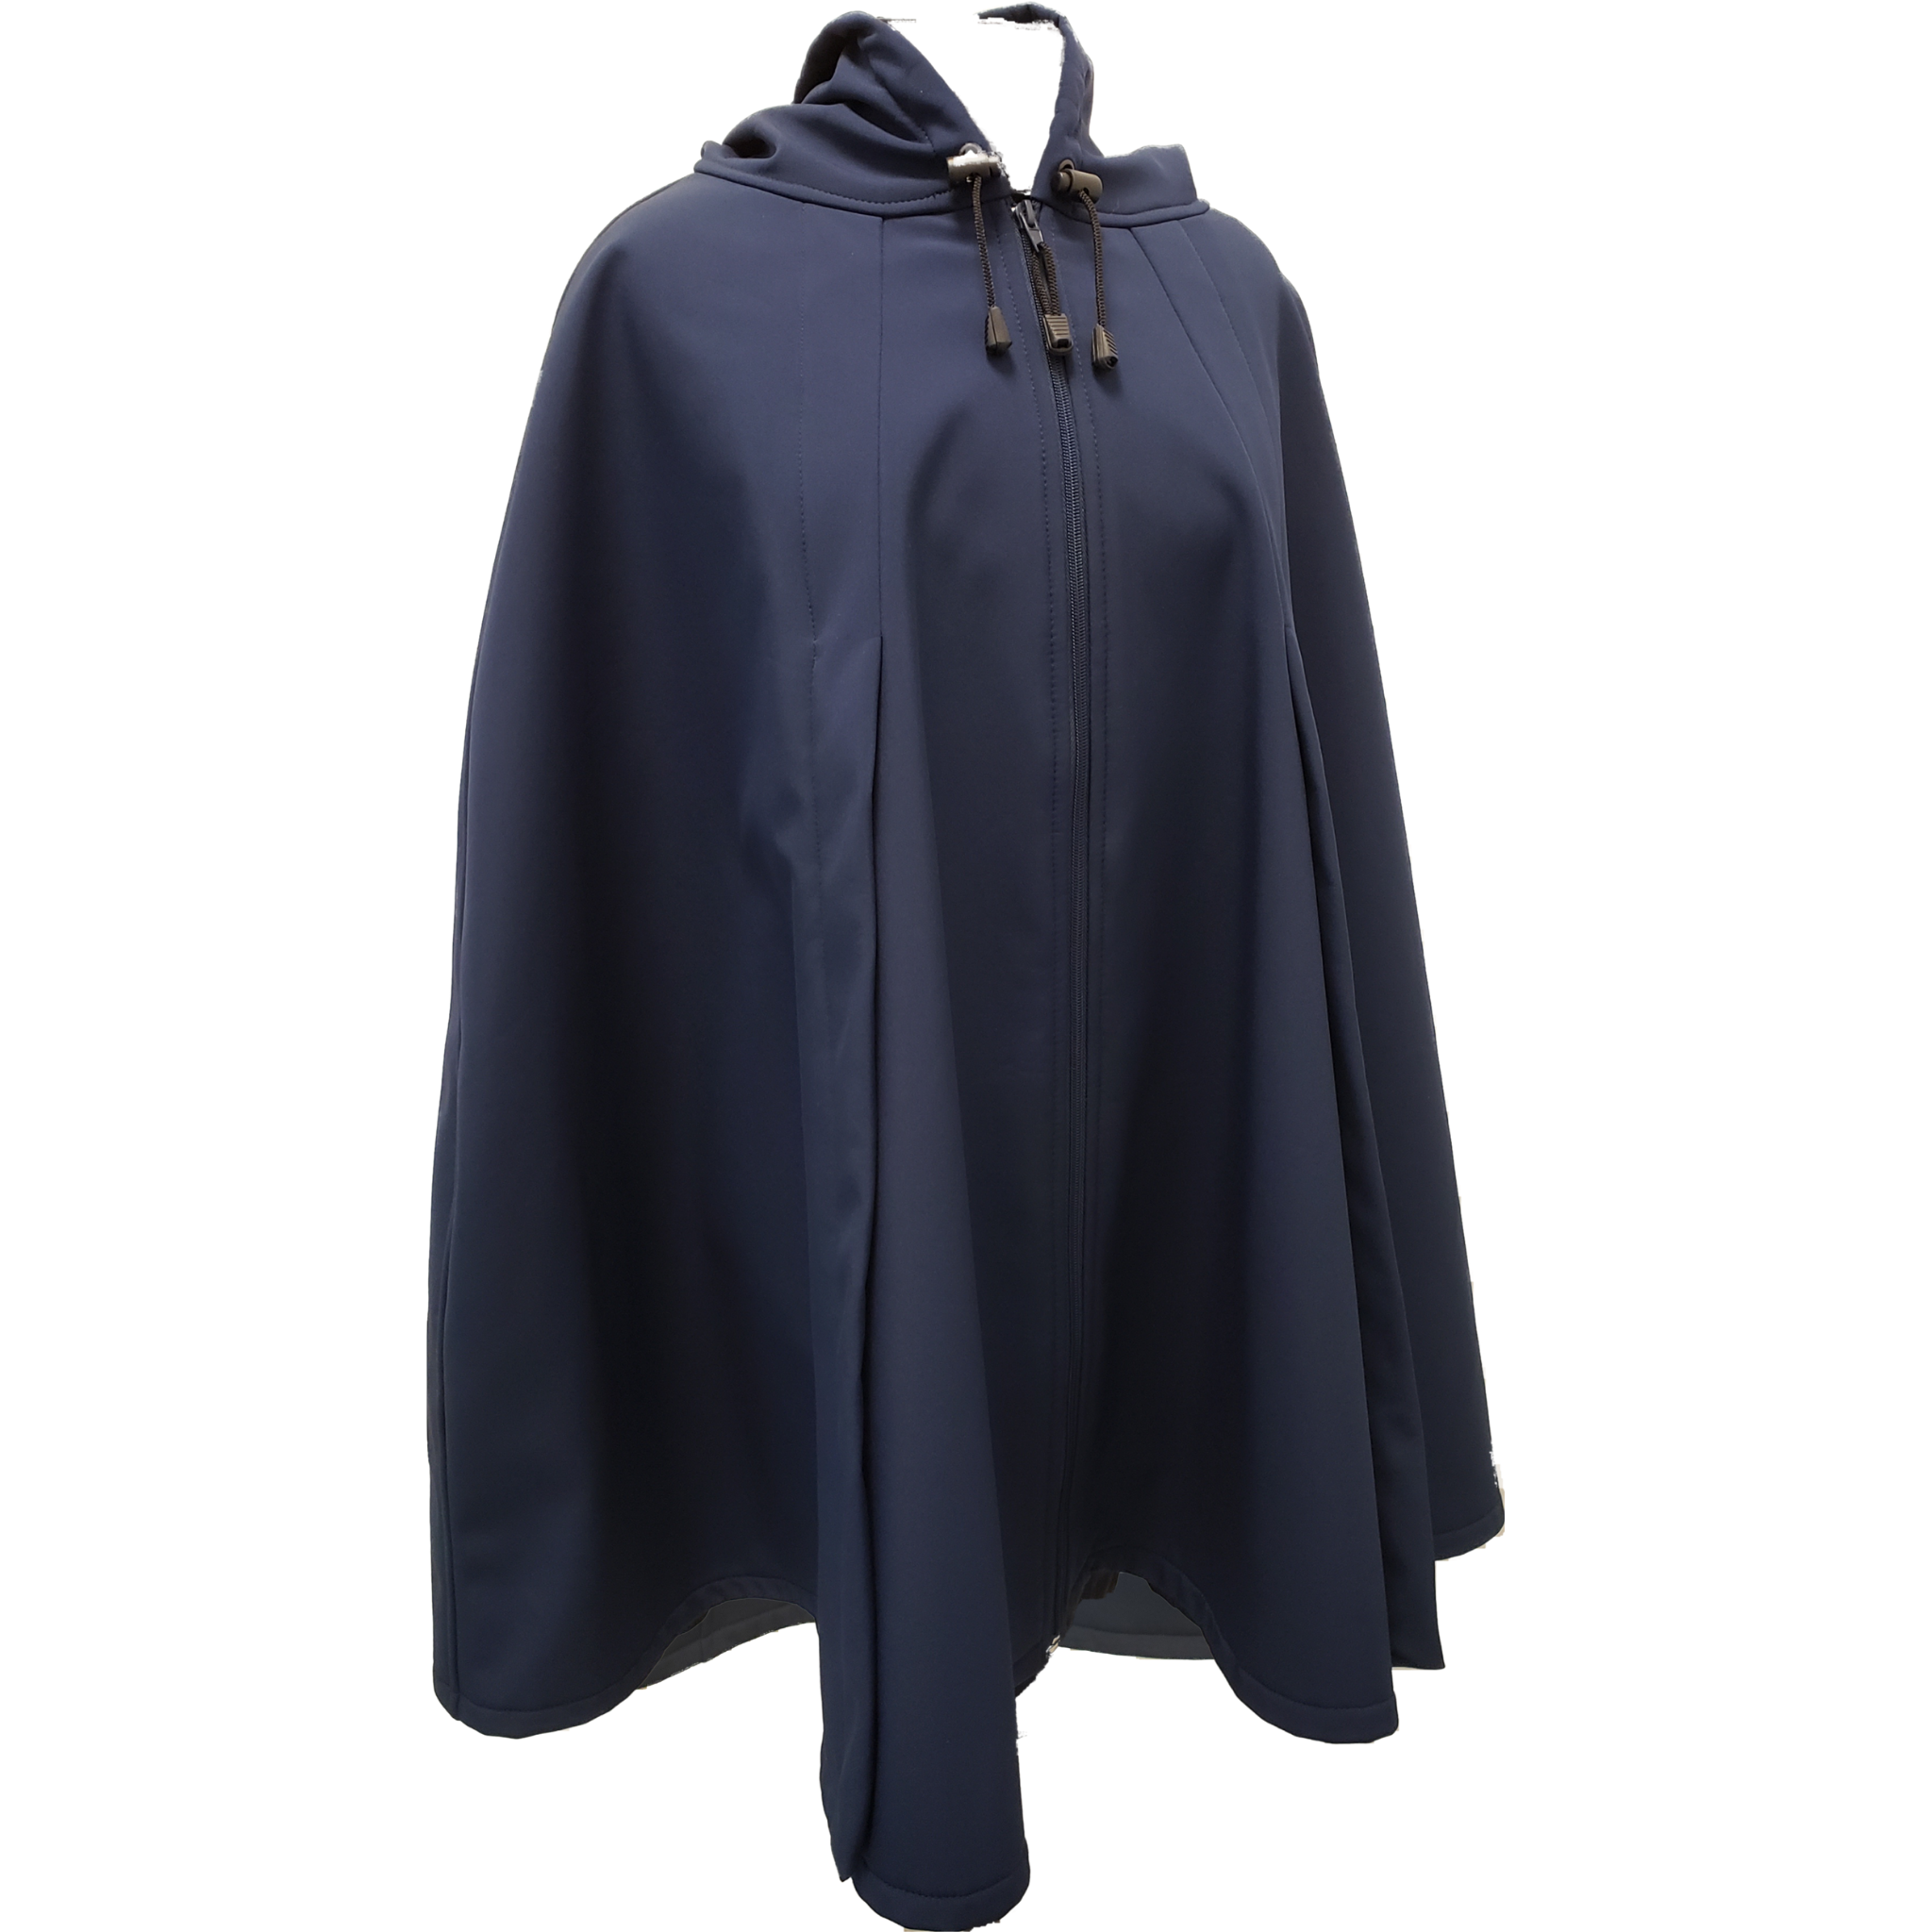 Waterproof Cape with Undervest